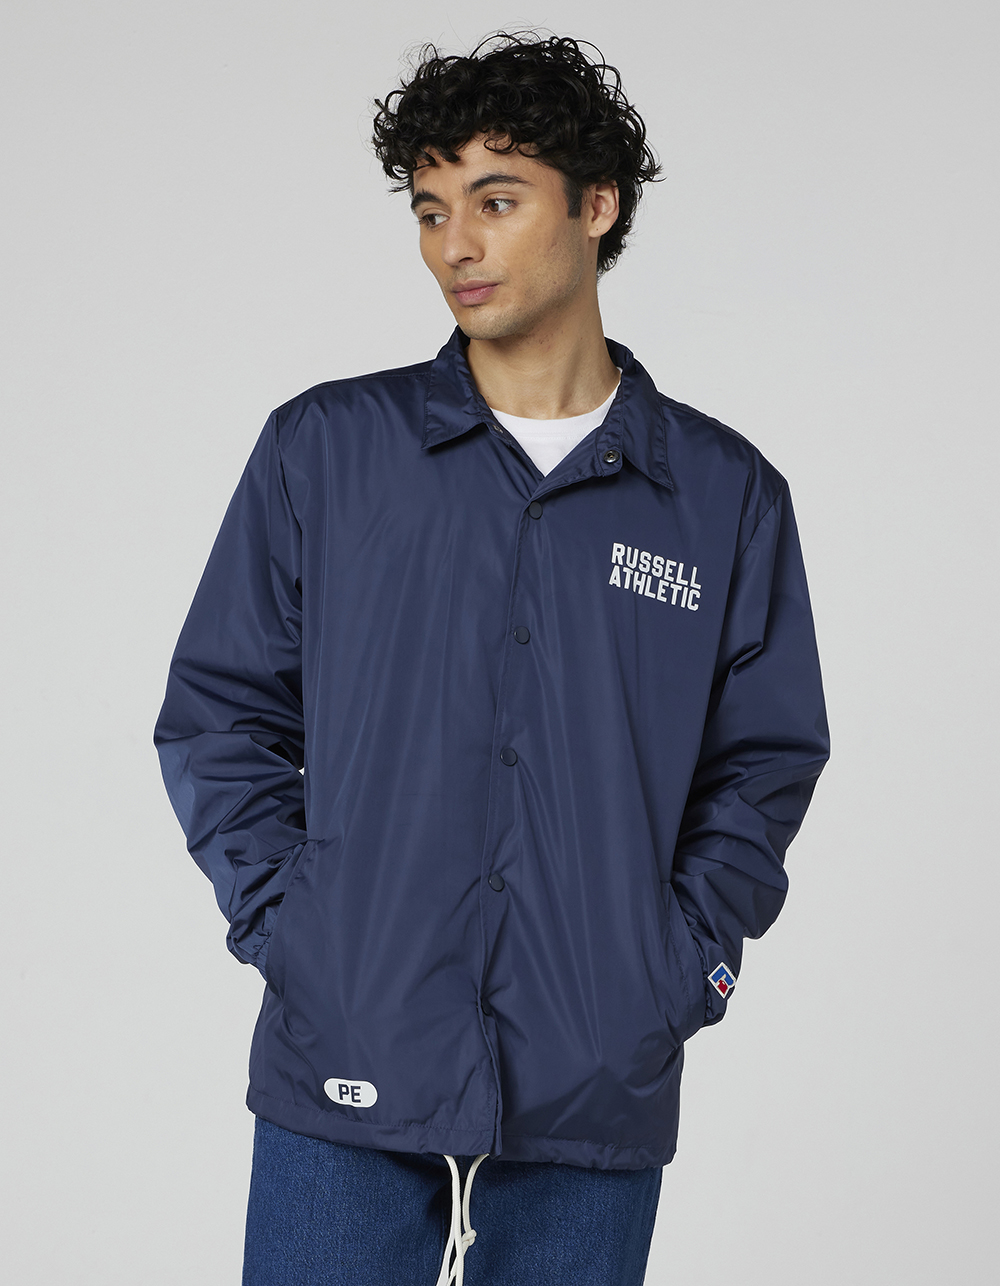 RUSSELL ATHLETIC Classic Style Unisex Coaches Jacket - NAVY